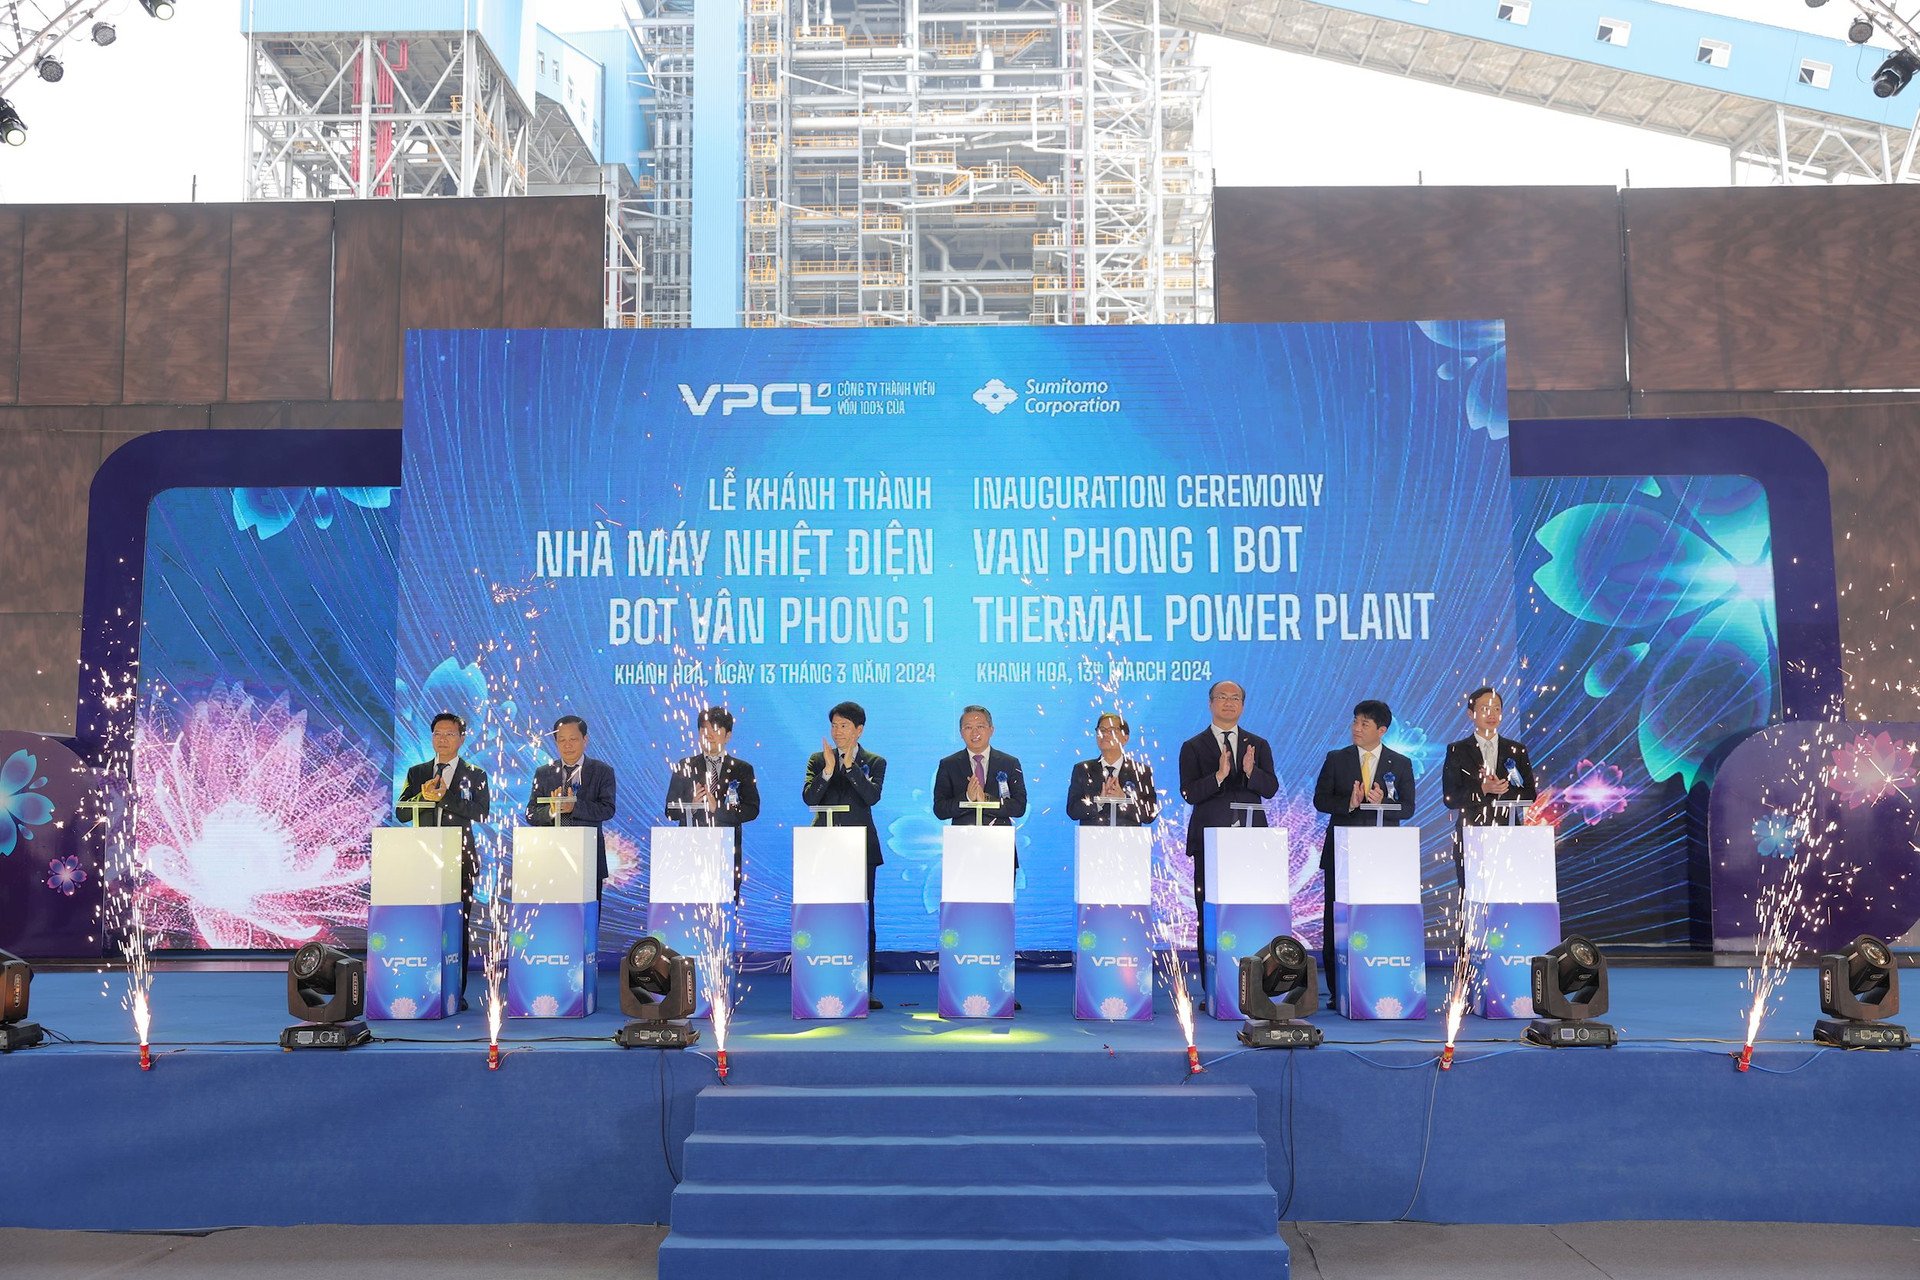 The inauguration ceremony of Van Phong 1 thermal power plant in Khanh Hoa province, central Vietnam, on March 13, 2024. Photo courtesy of VIetnam News Agency.